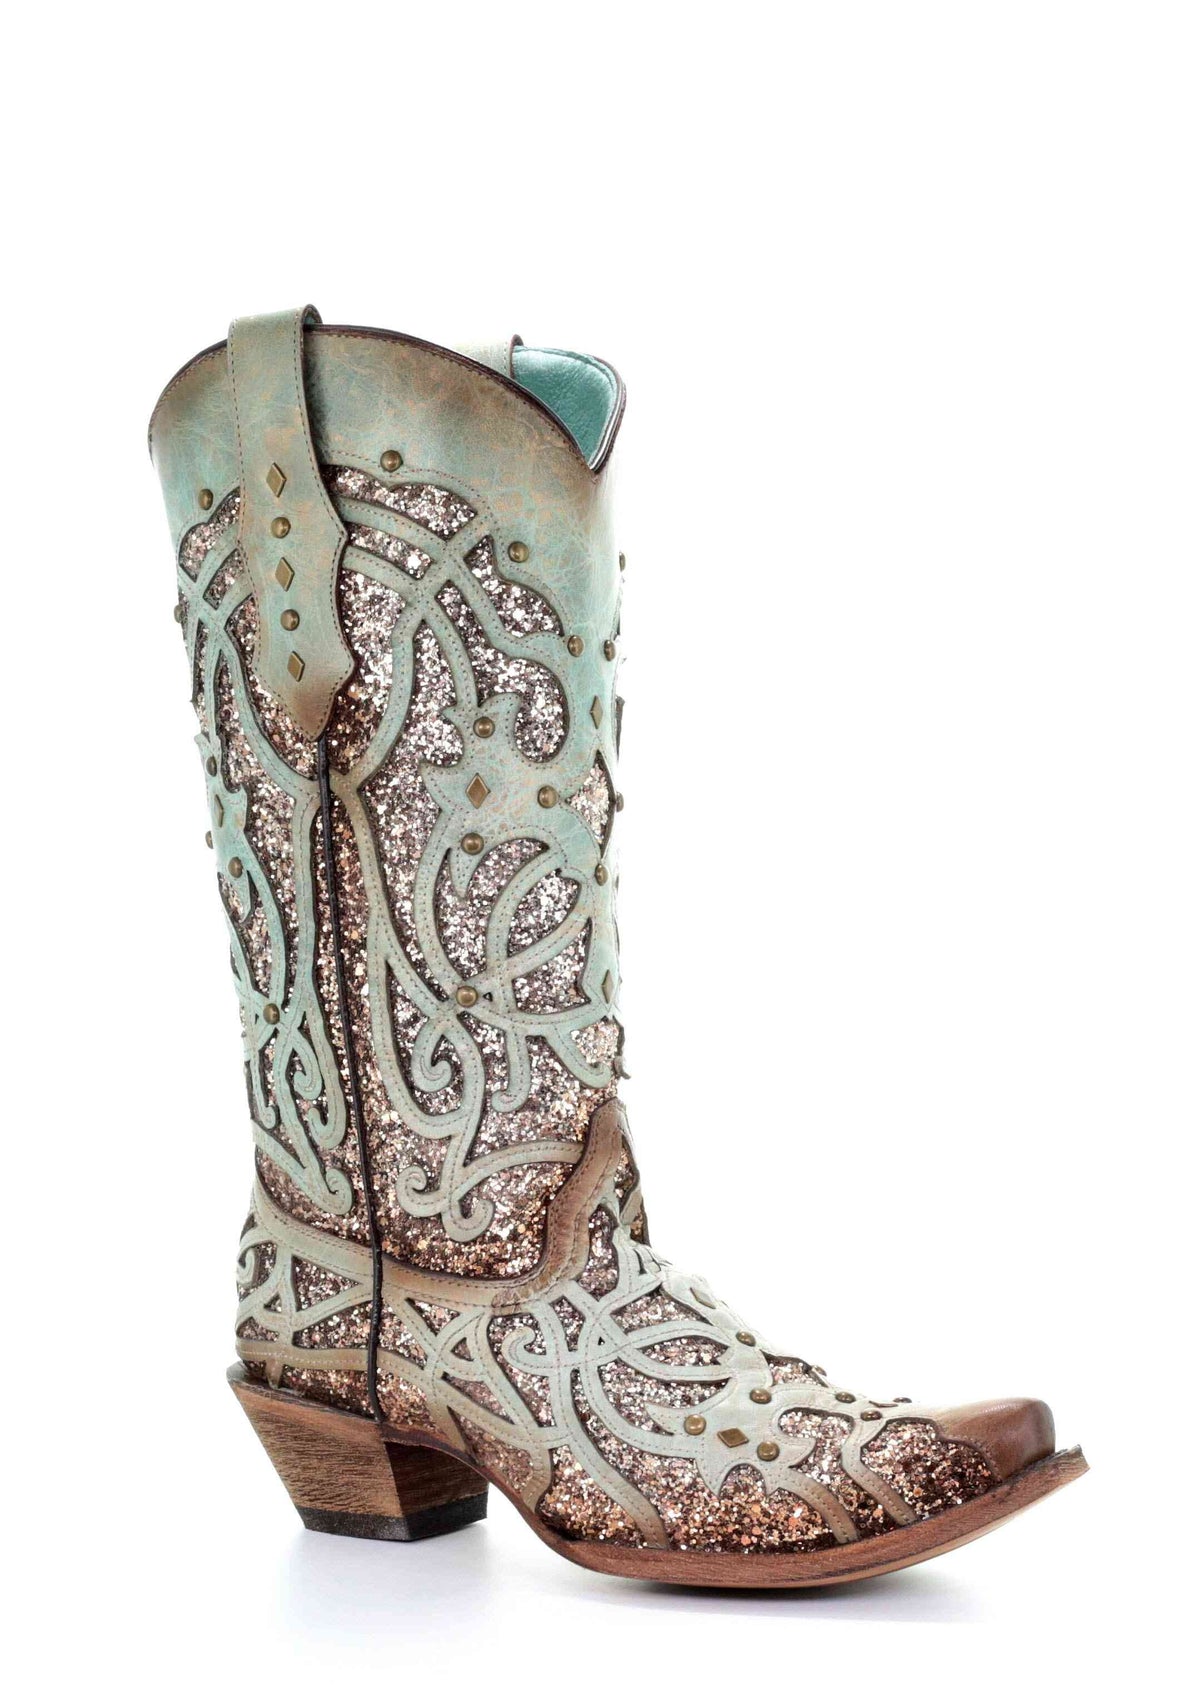 WOMEN’S CORRAL MINT GLITTERED INLAY AND STUDS SNIP-TOE BOOTS - El Toro Boots